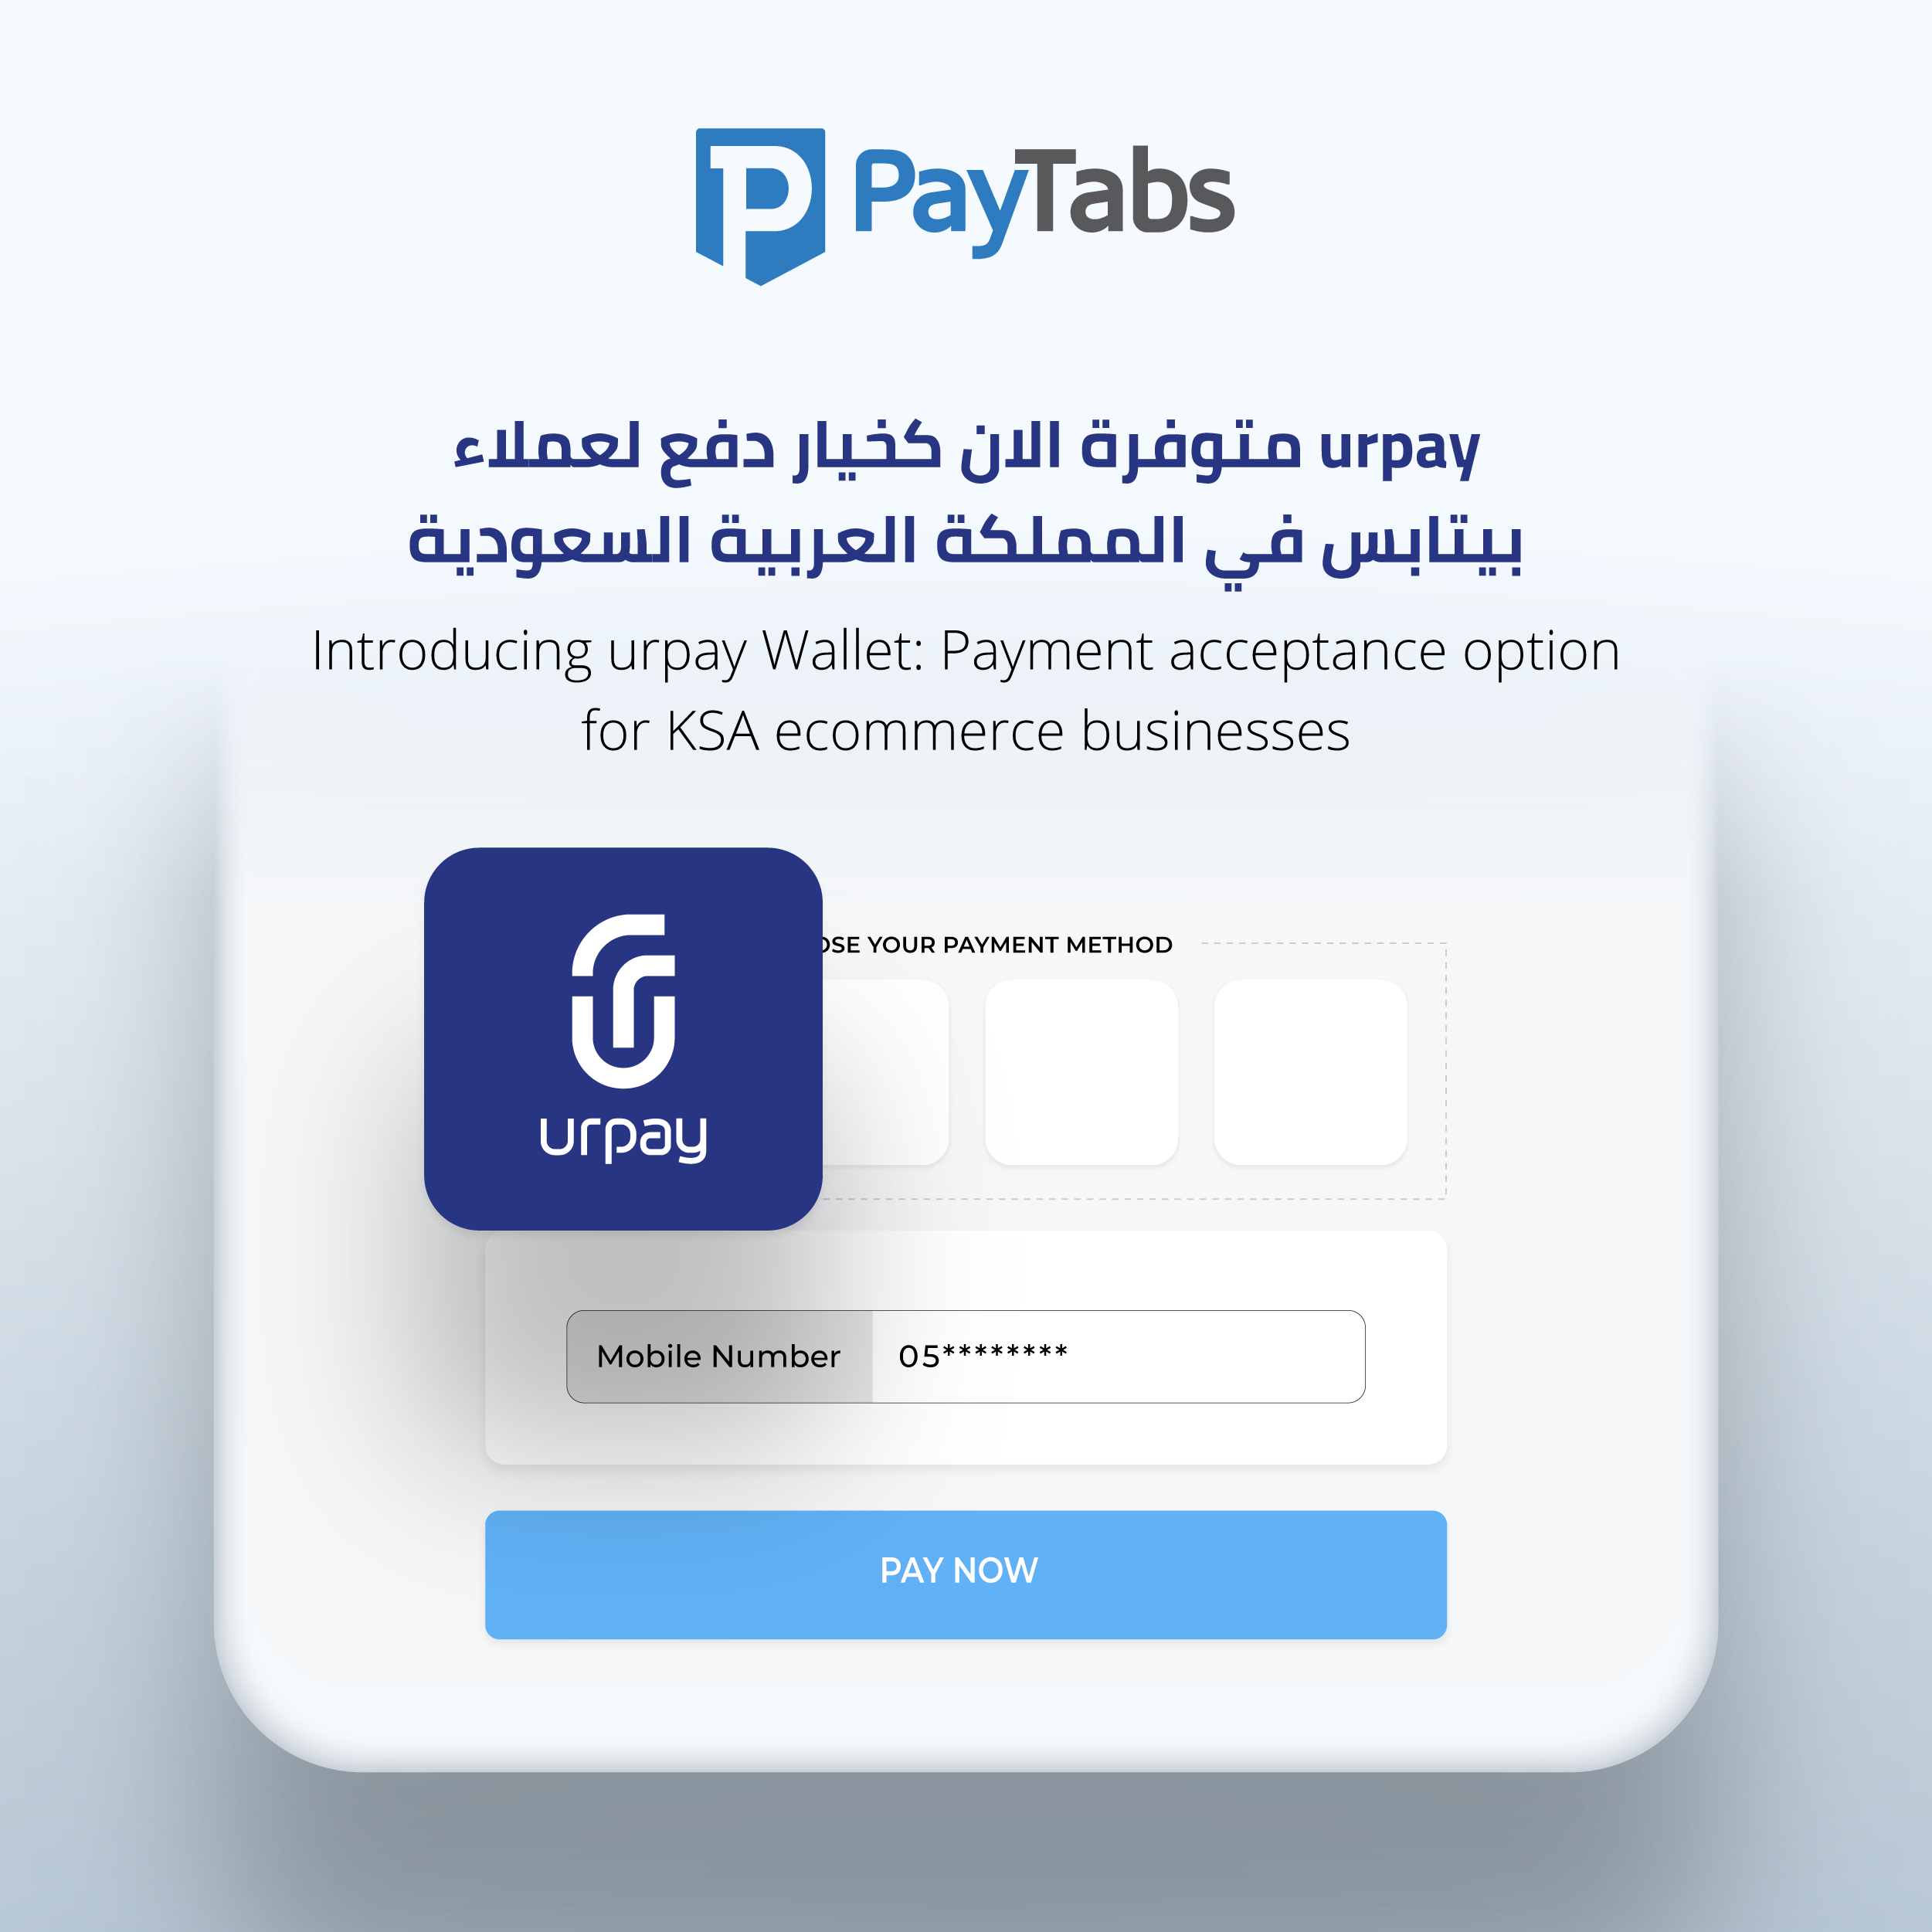 Urpay supported in KSA